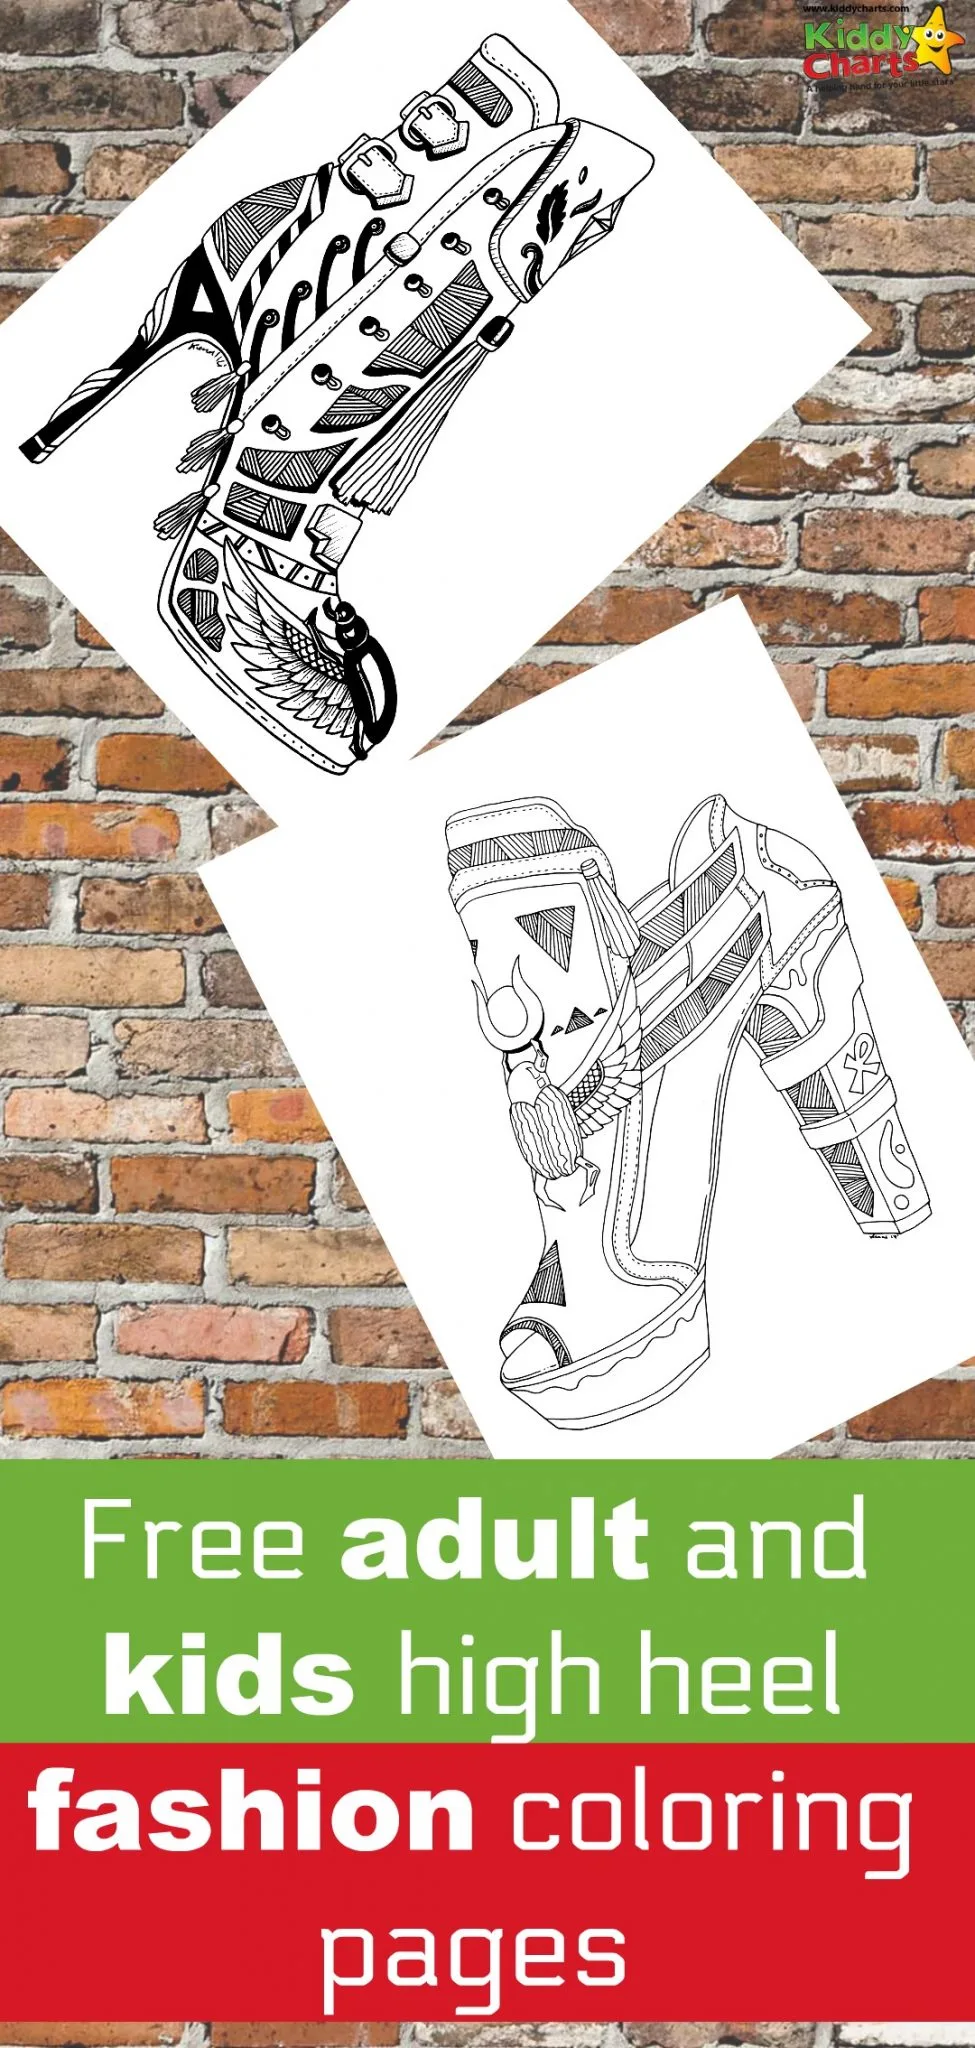 Download some fabulous free high heel shoe coloring pages to take you back to the 70s!